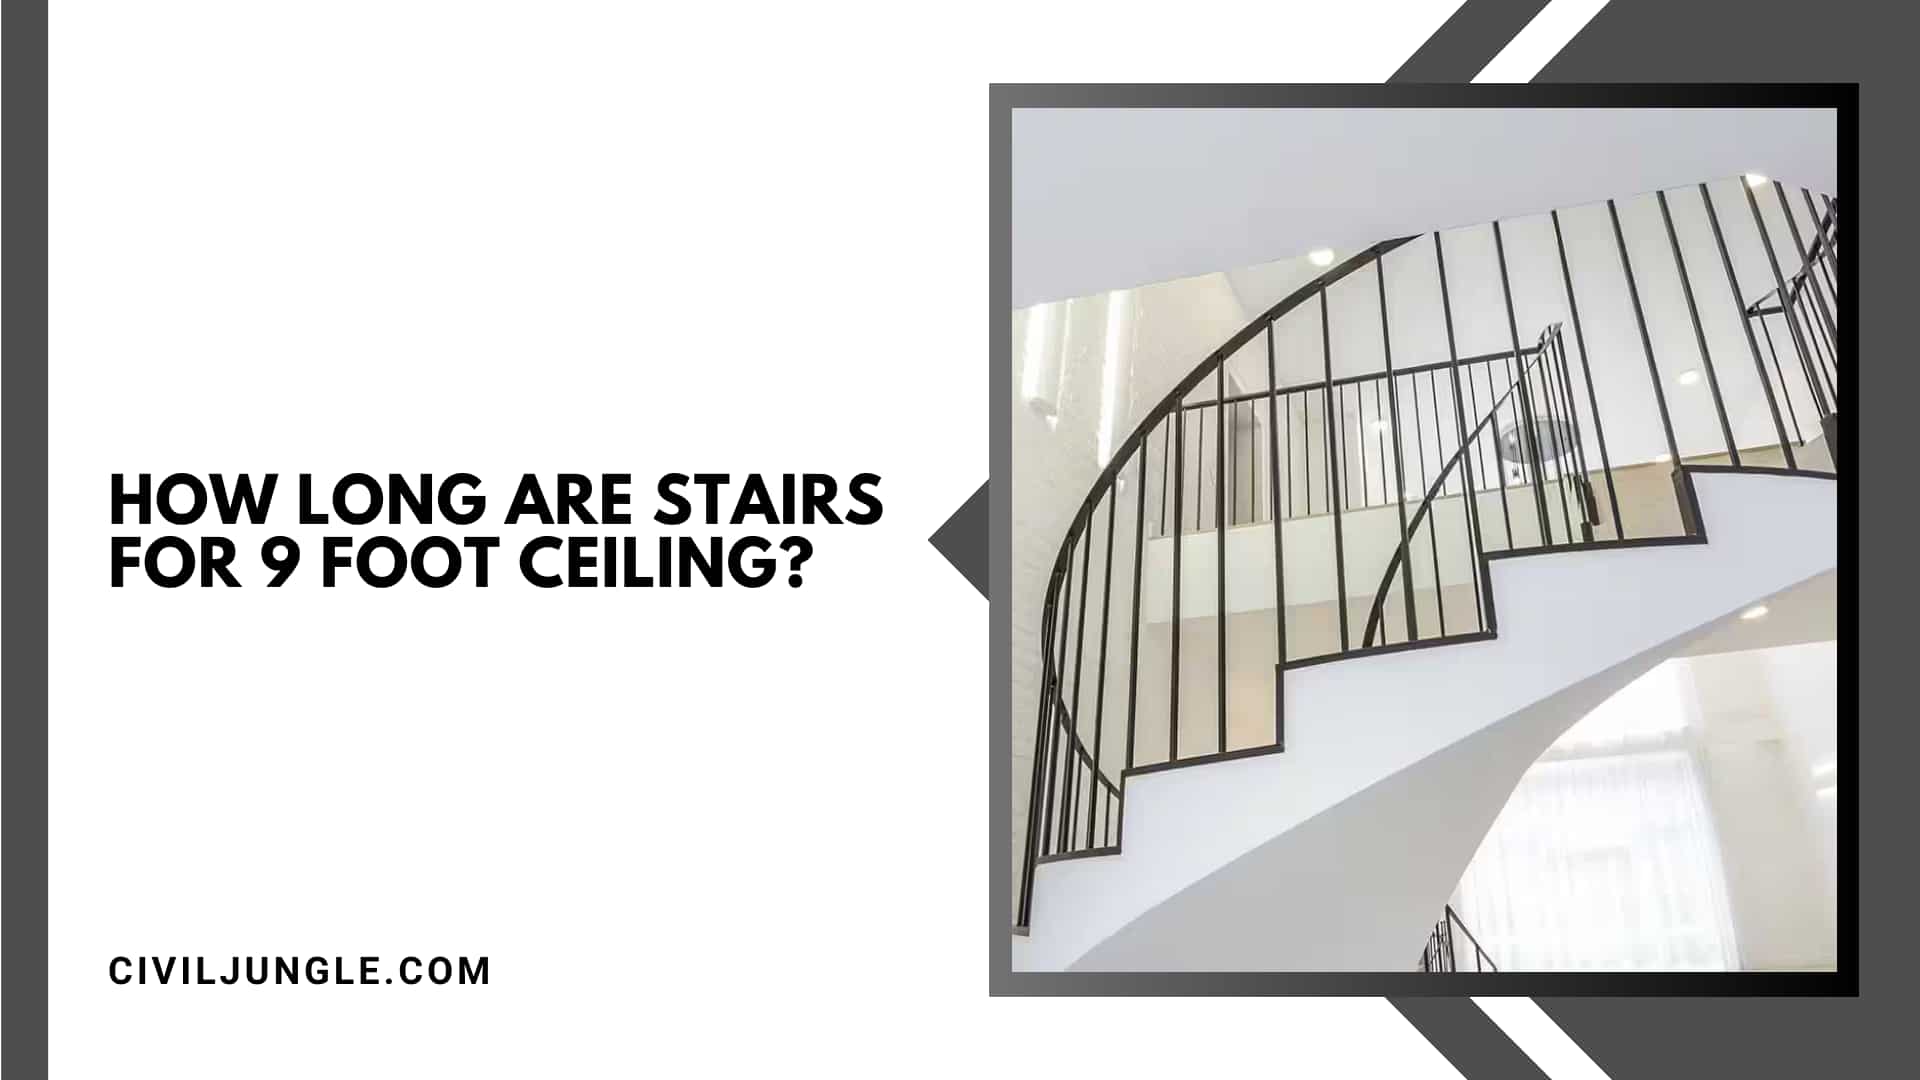 How Long Are Stairs for 9 Foot Ceiling?